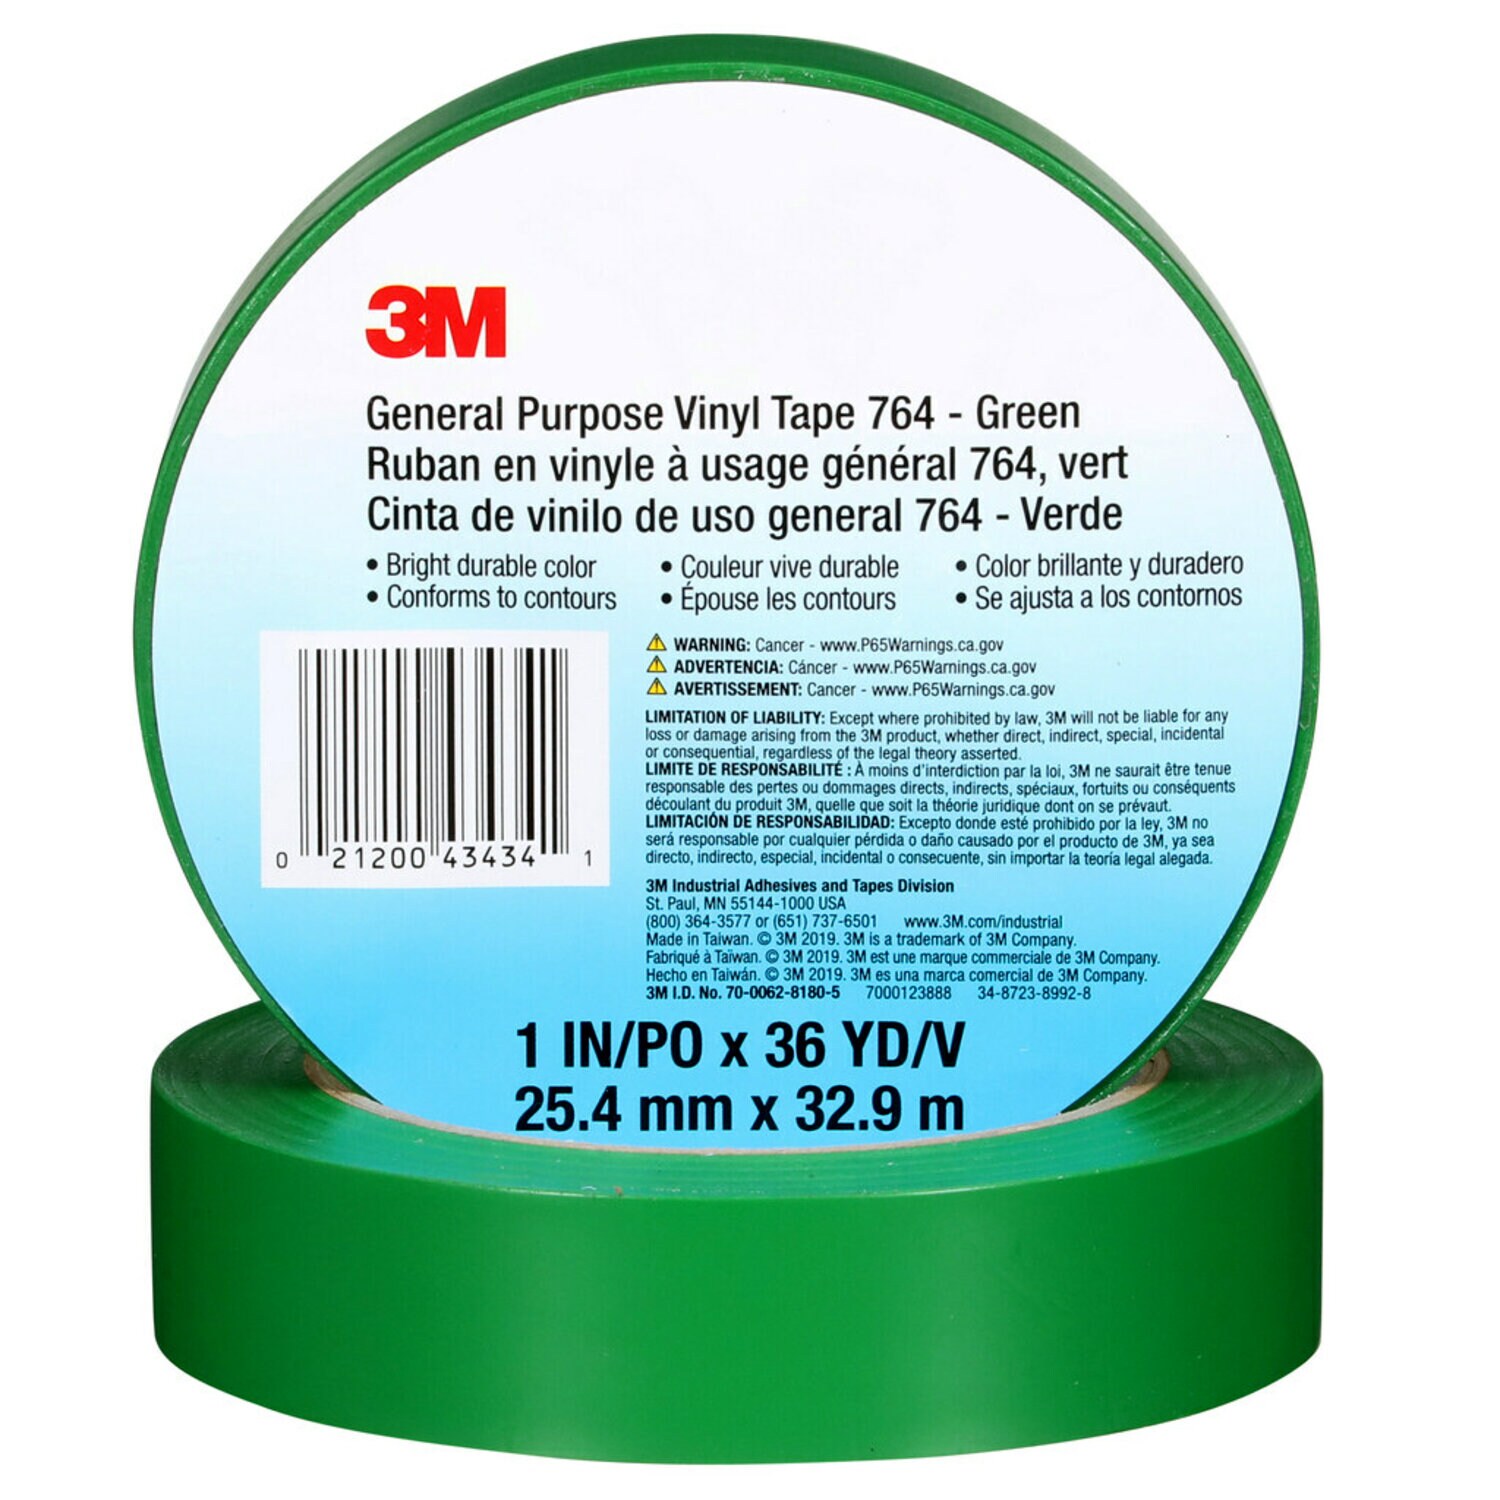 7000123888 - 3M General Purpose Vinyl Tape 764, Green, 1 in x 36 yd, 5 mil, 36 Roll/Case, Individually Wrapped Conveniently Packaged